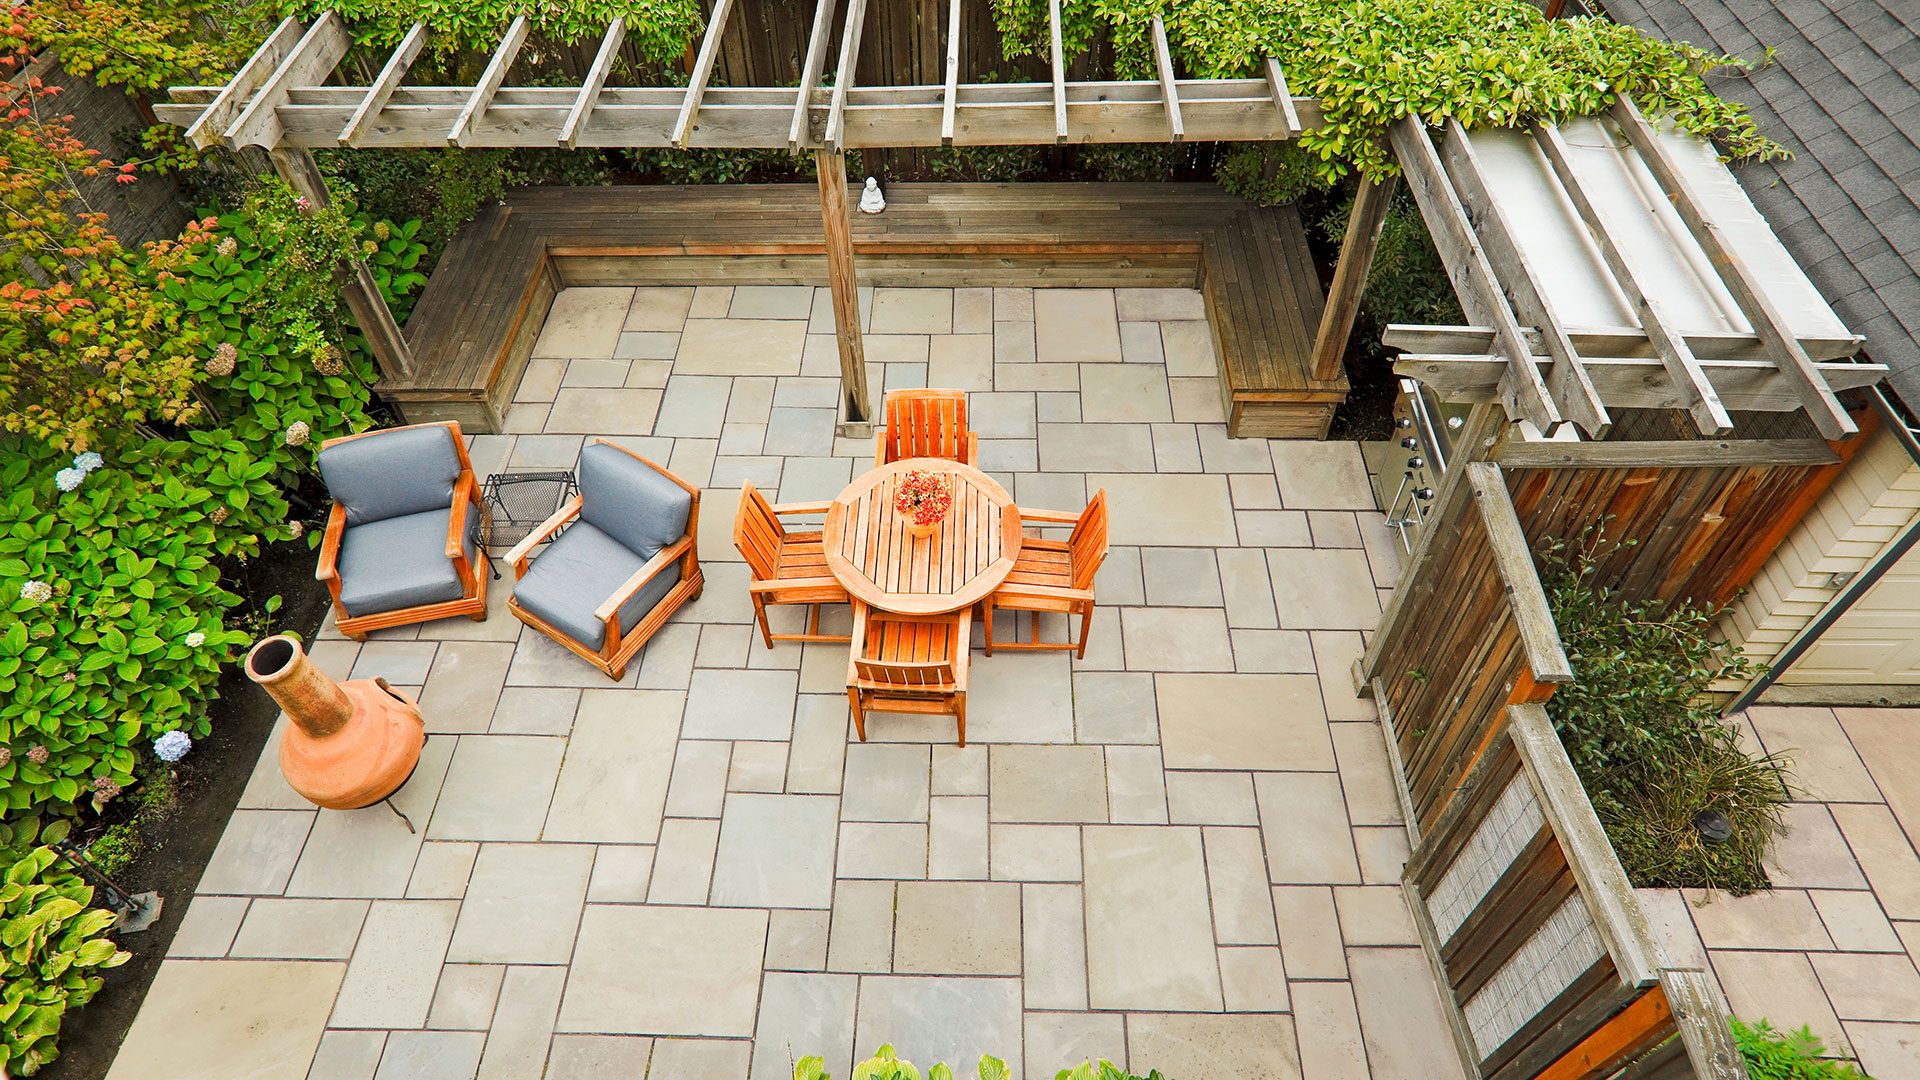 outdoor entertainment area with appian way tiled flooring